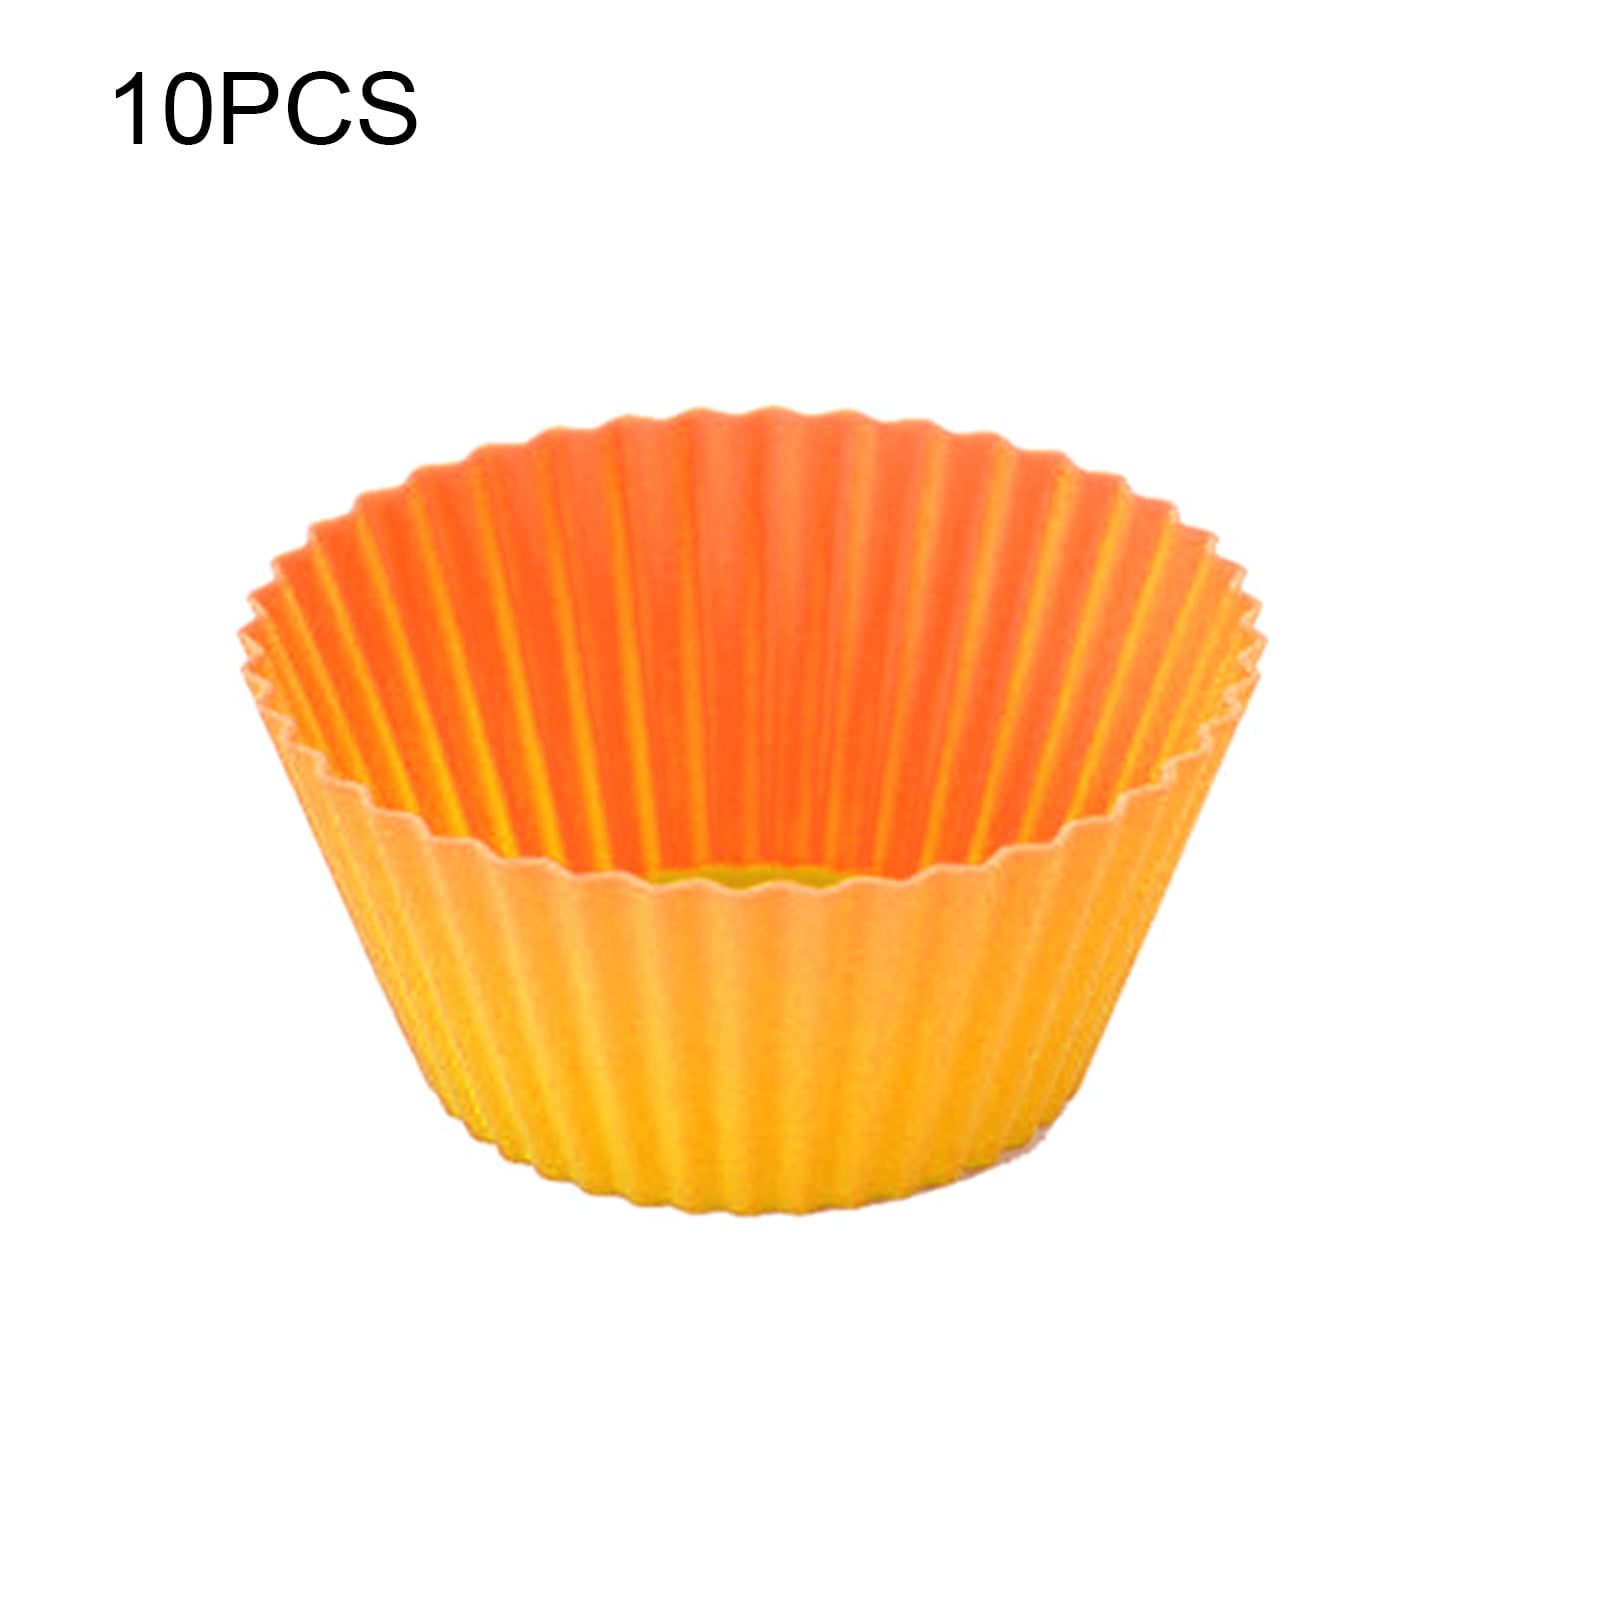 Details about   1Pc Silicone Round Bread Mold Cake Pan Muffin Mould Bakeware Baking Tray Tool 